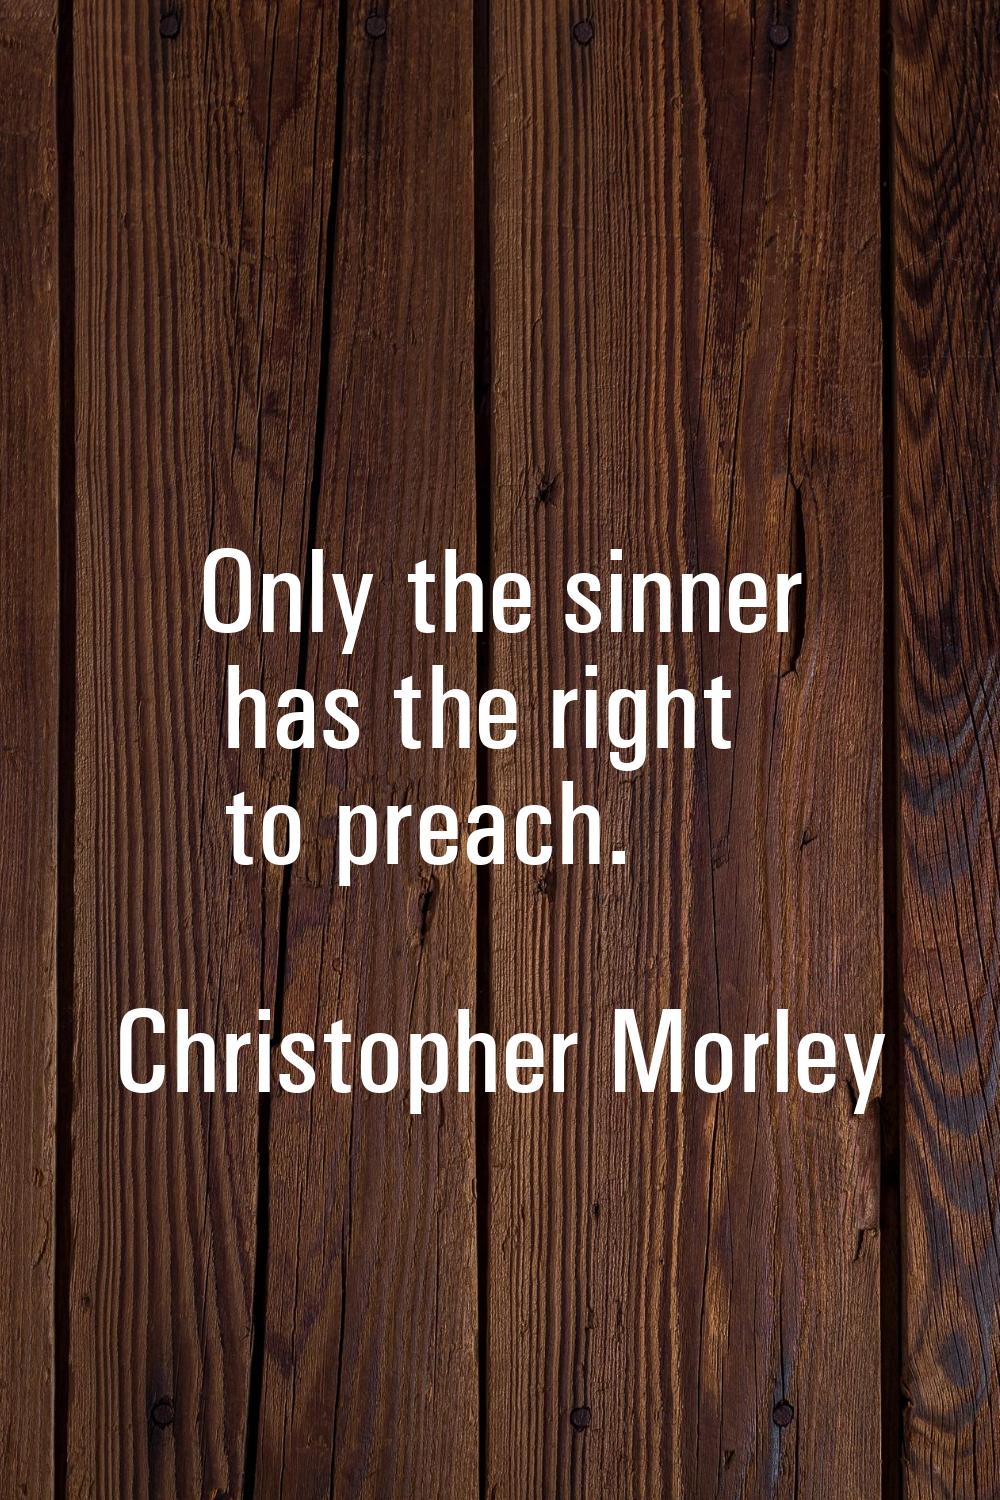 Only the sinner has the right to preach.